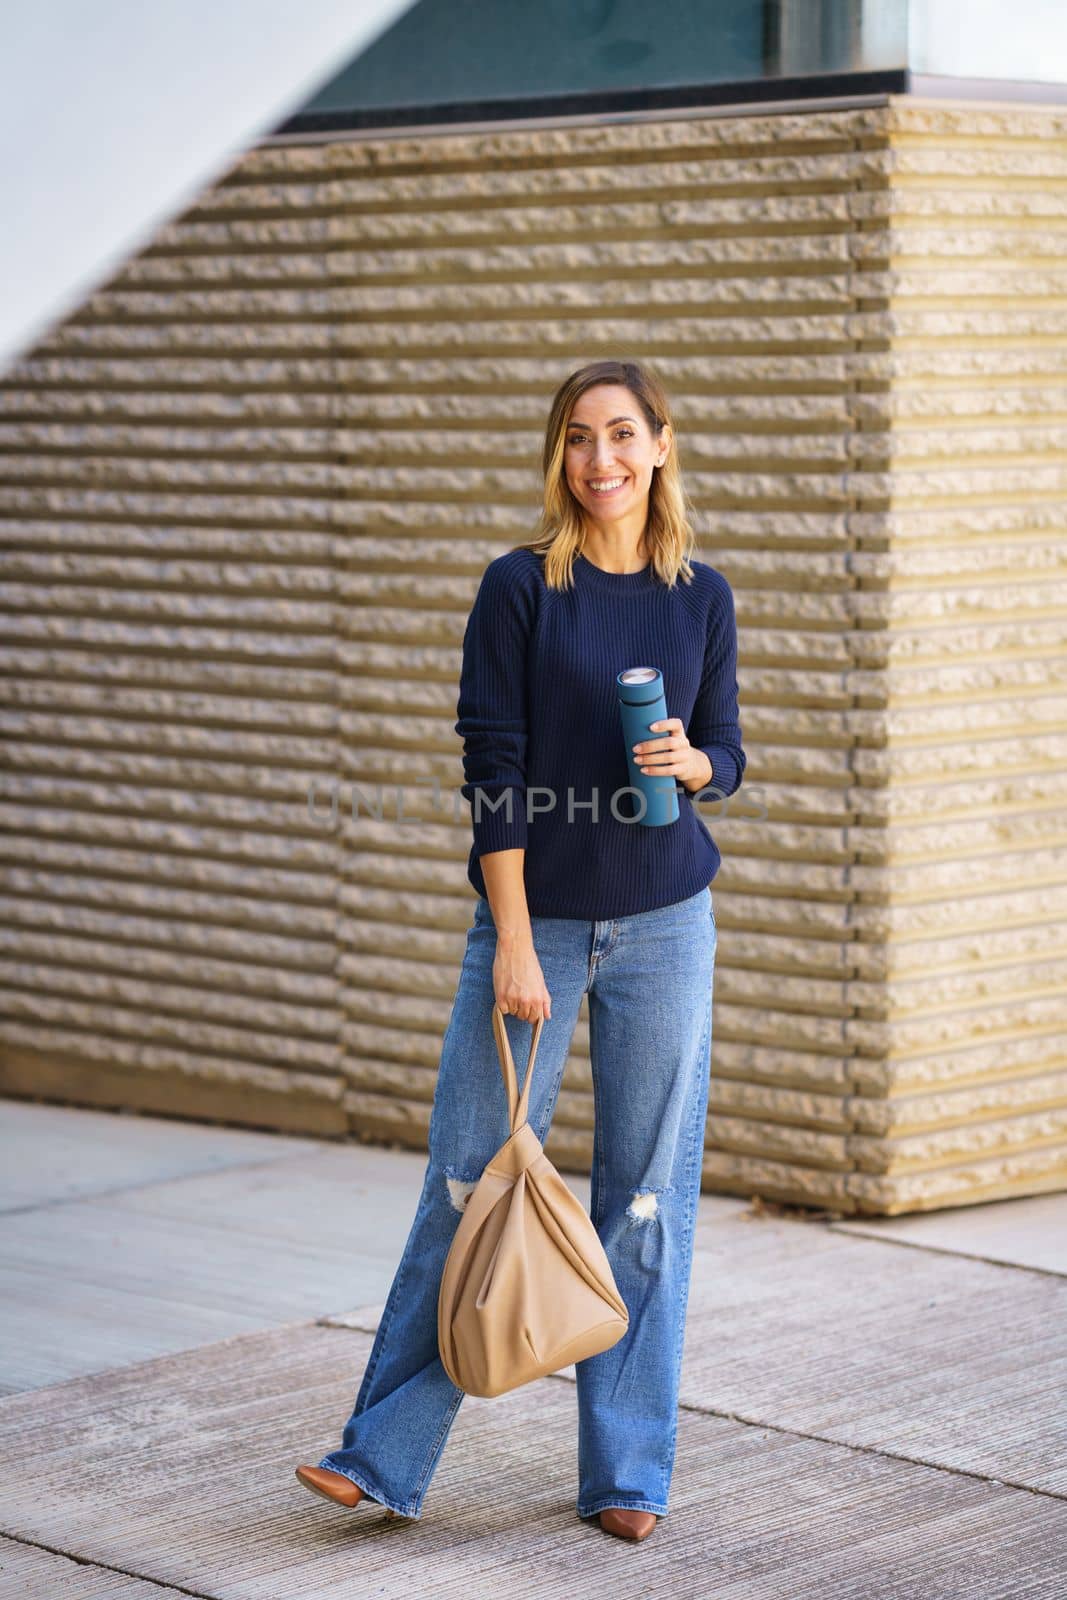 Full body cheerful woman in stylish outfit with bag and thermos standing on pavement and smiling near contemporary building on city street